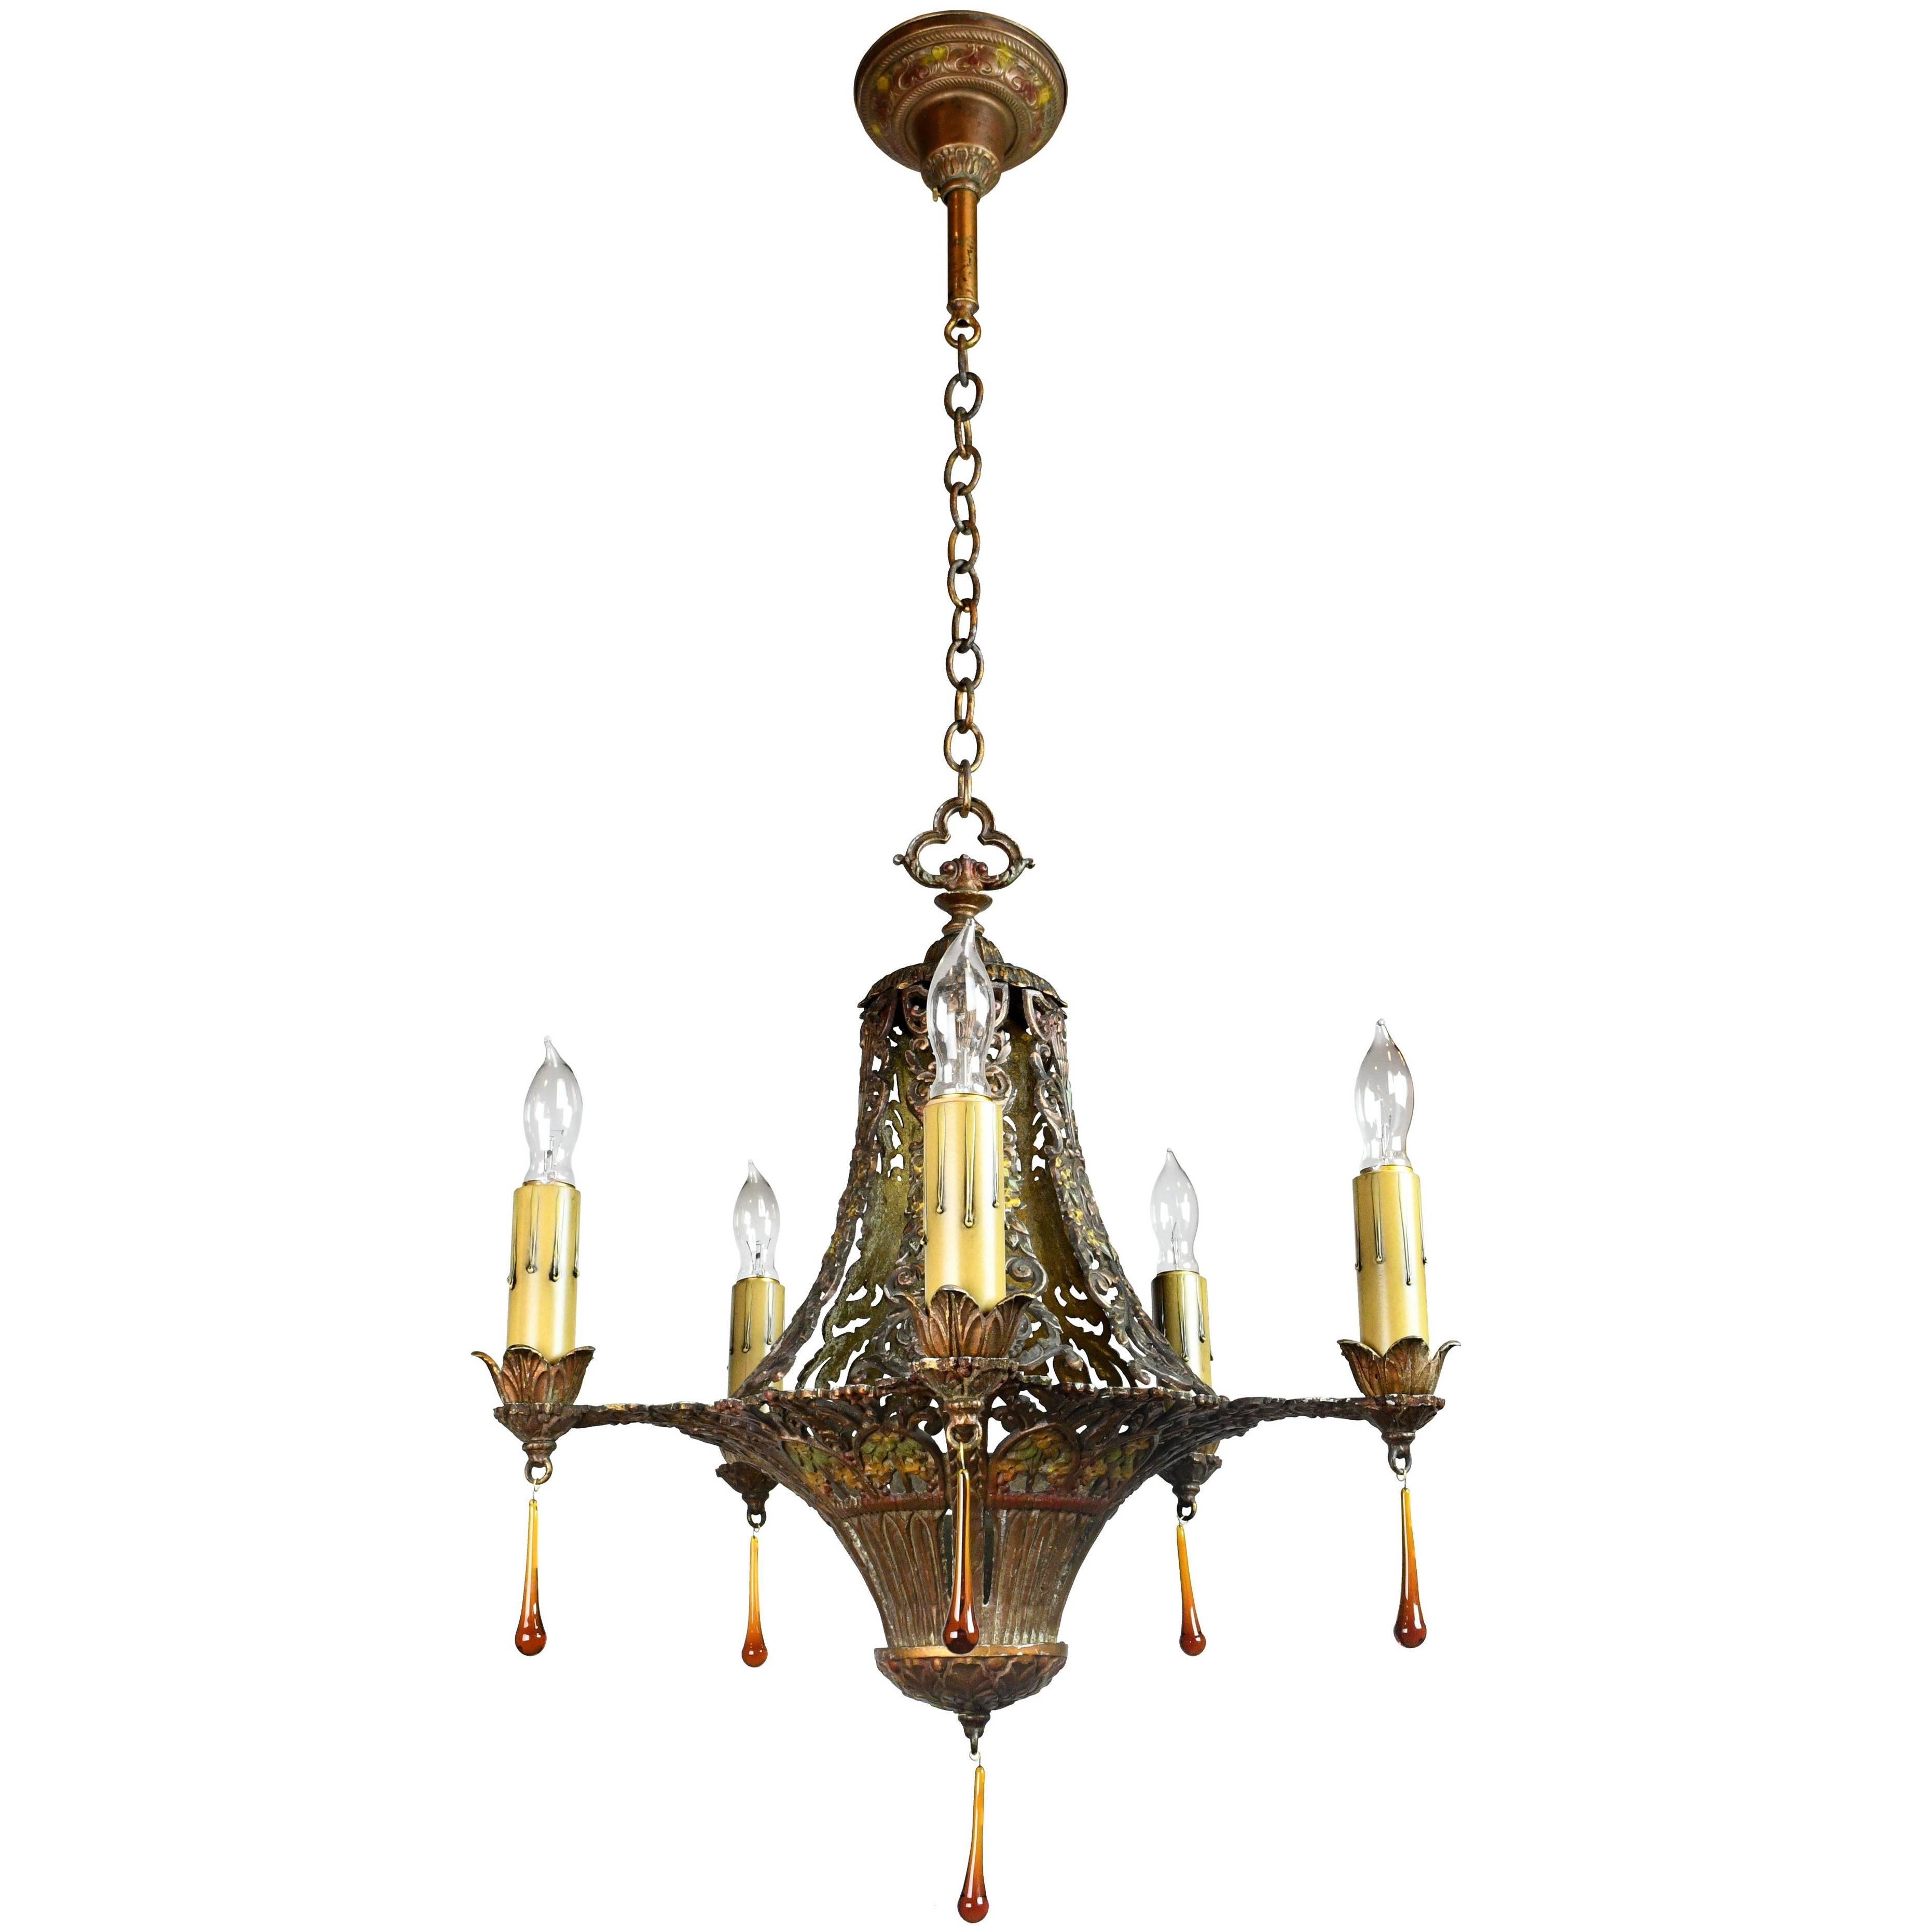 Five Candle Polychrome Chandelier with Floral Details